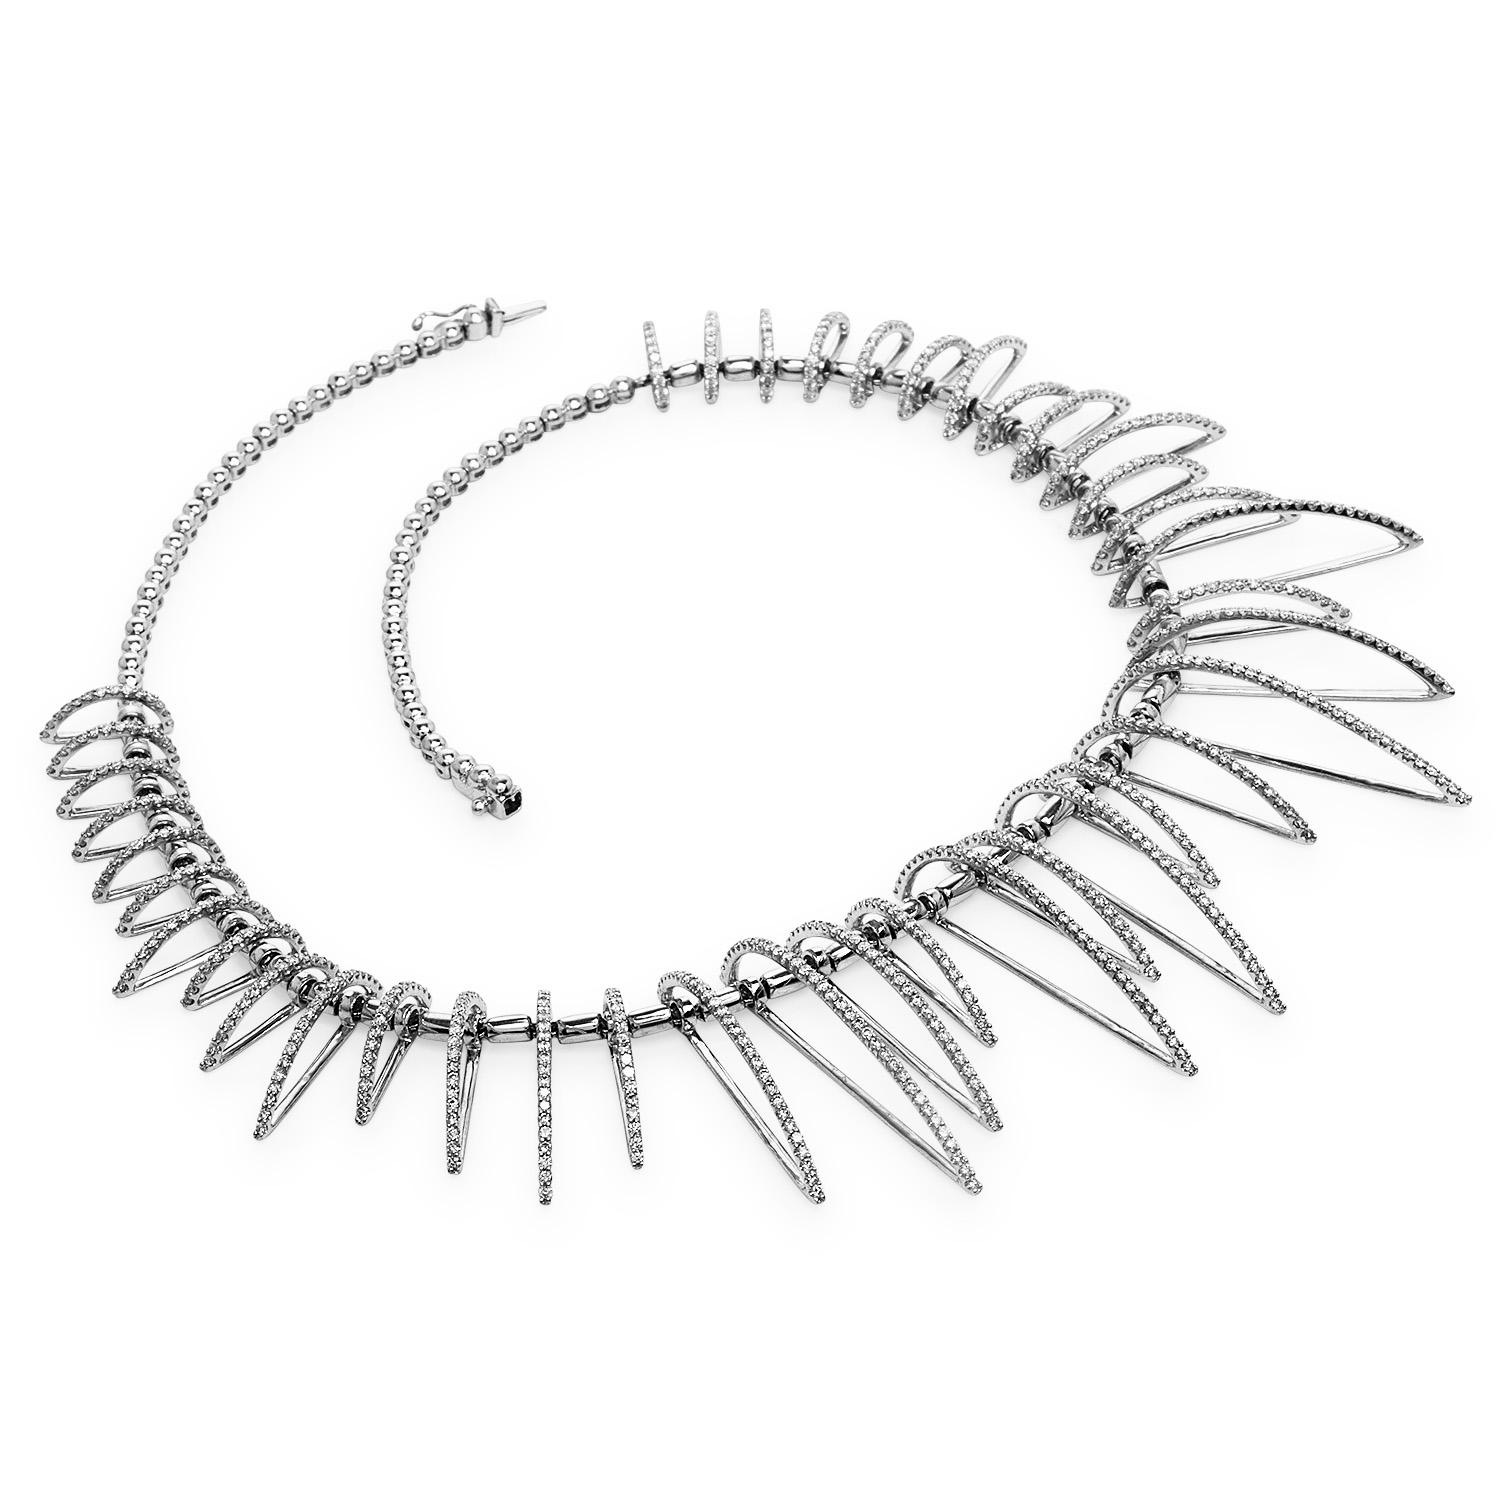 Exquisite Modern elongated open link style necklace, perfect to celebrate any occasion and to match diamond hoops earrings.

Crafted in solid 18K white gold, this necklace has 39 half hoop graduated links, all accented by round-cut, pave-set